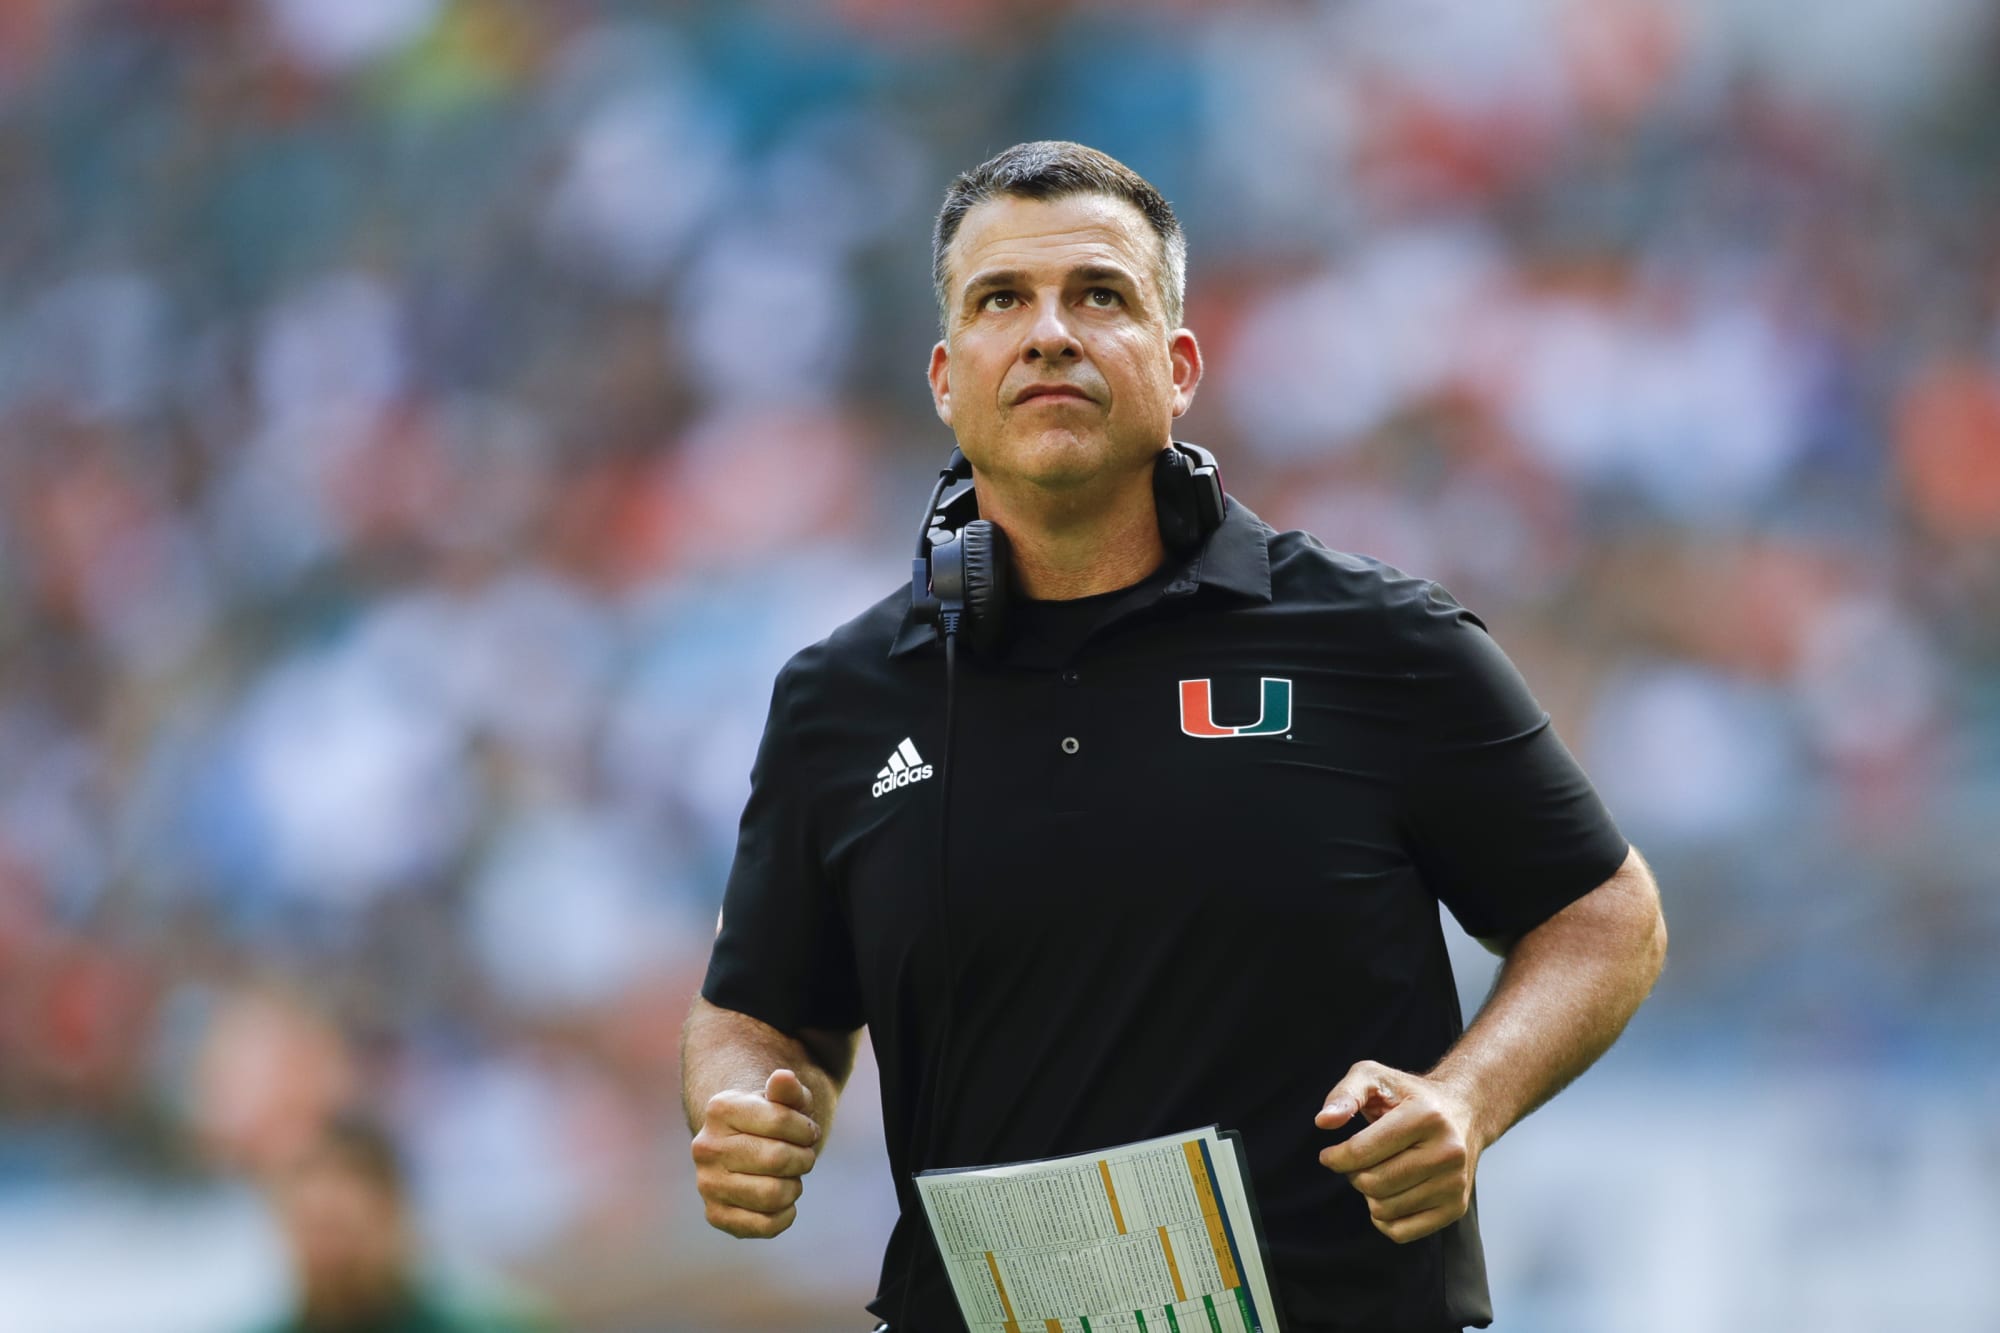 Miami football commits eight turnovers in blowout loss to Duke